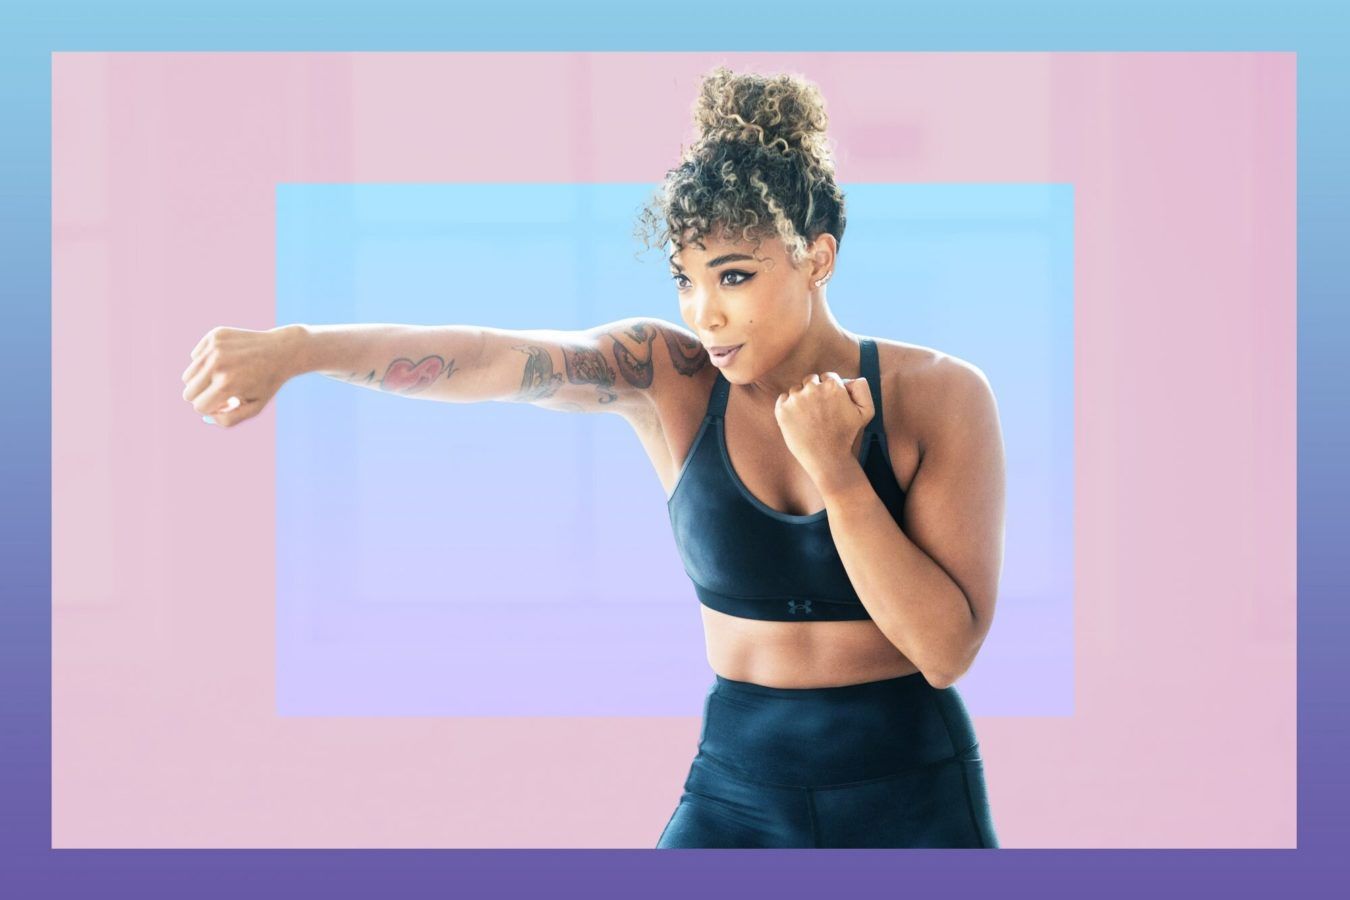 Light your shoulders on fire with this 15-minute strength and boxing workout from SWEAT’s Monica Jones